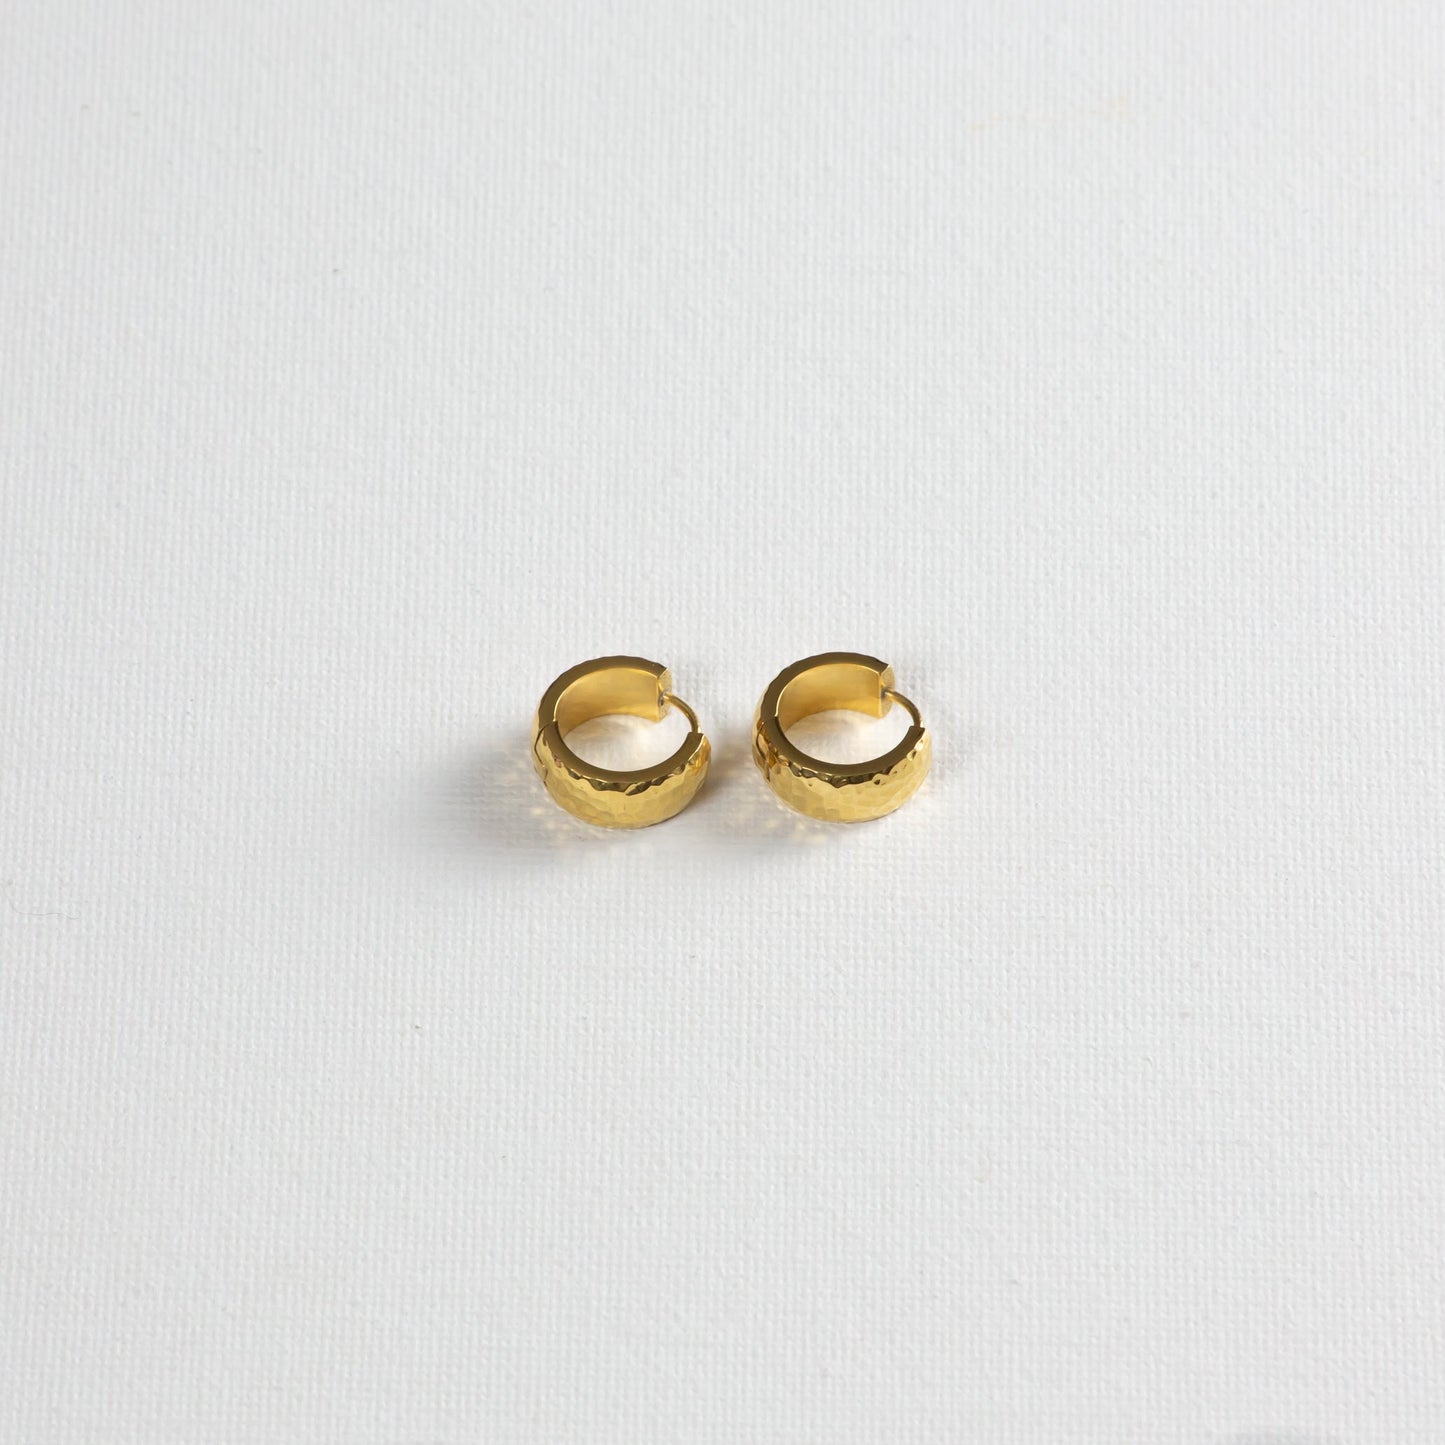 The earrings photographed on a white background on a slight angle from the bottom. It subtly shows the hammered texture on the side.